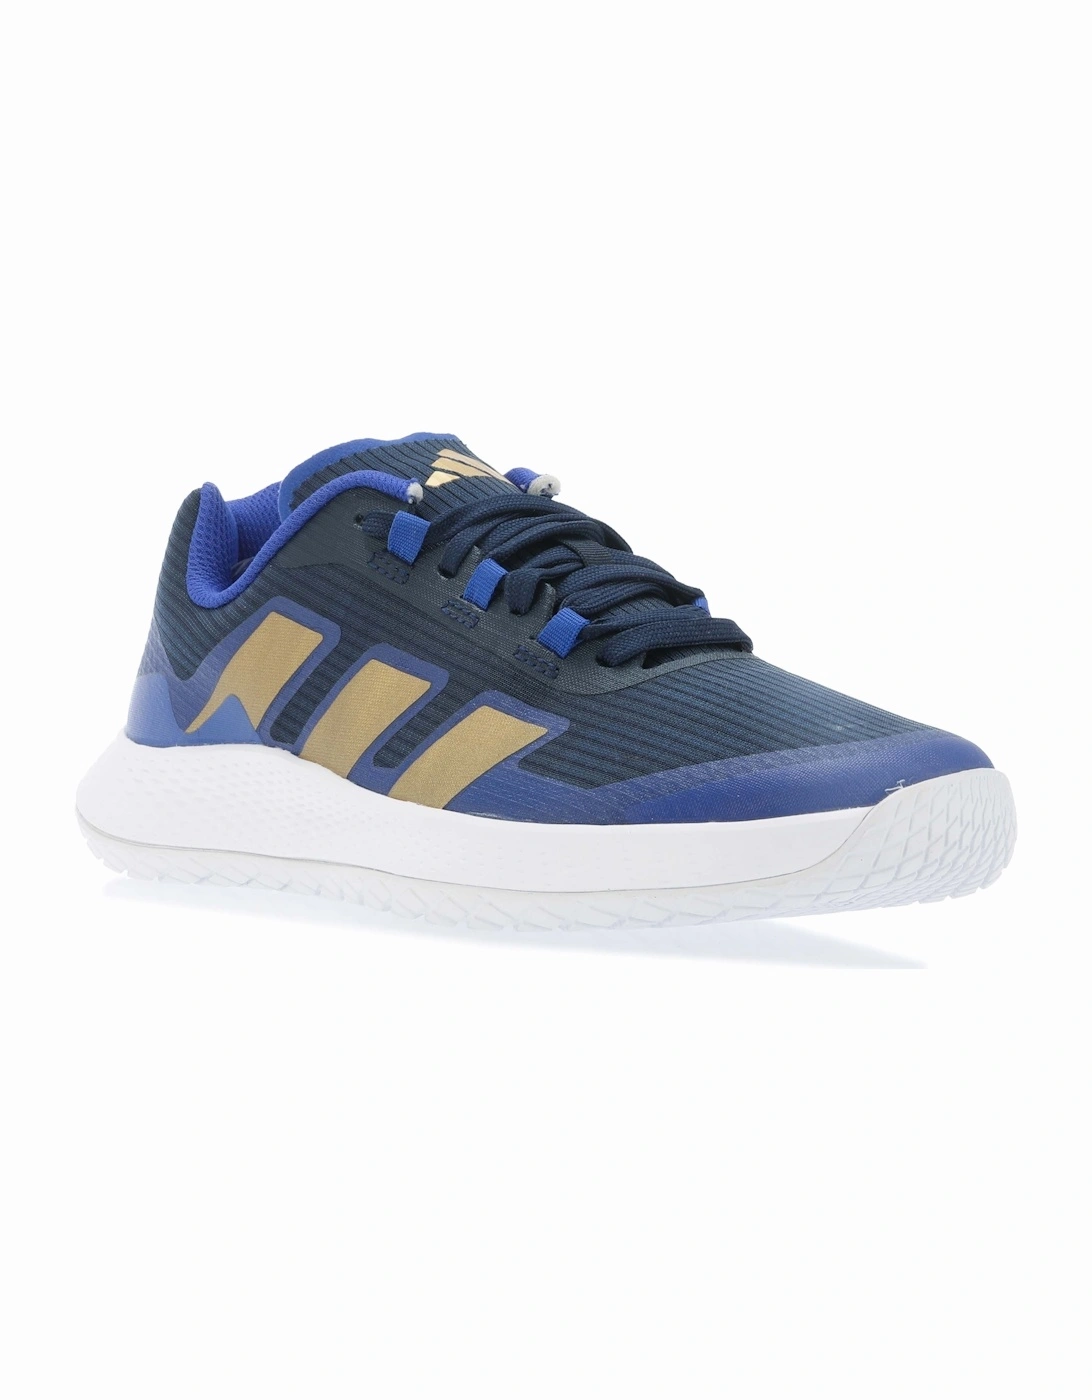 Mens Forcebounce Volleyball Trainers